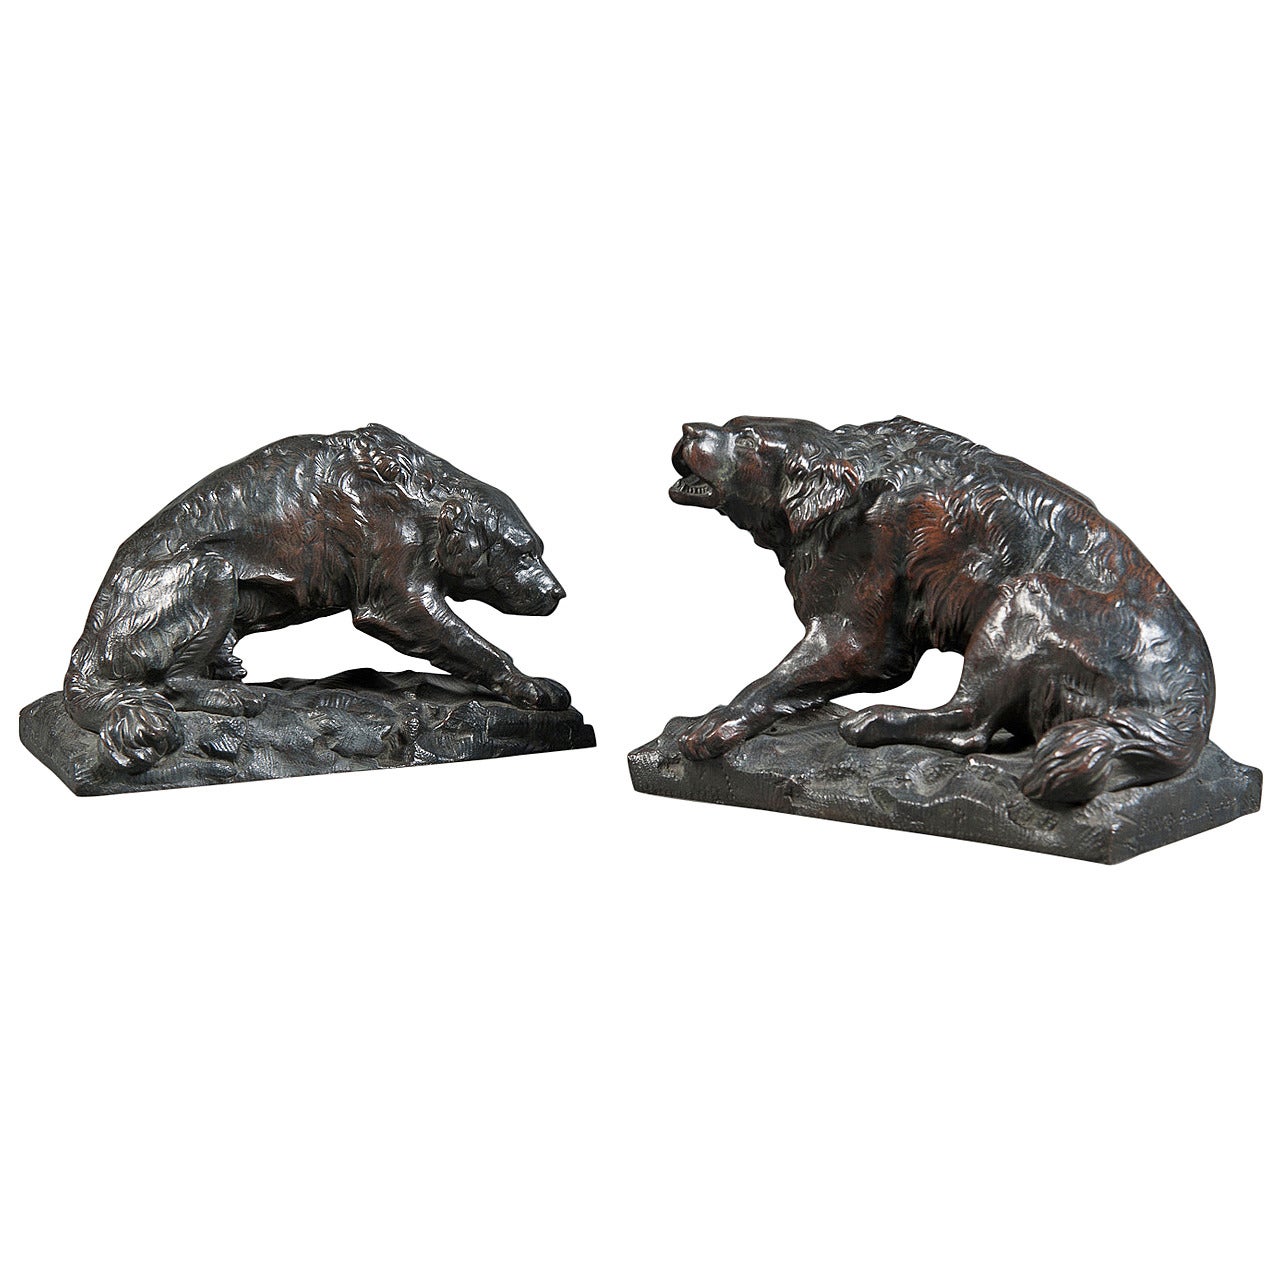 A Pair of French Patinated Bronze Wild Dogs by A. Barye Barbedienne Foundry